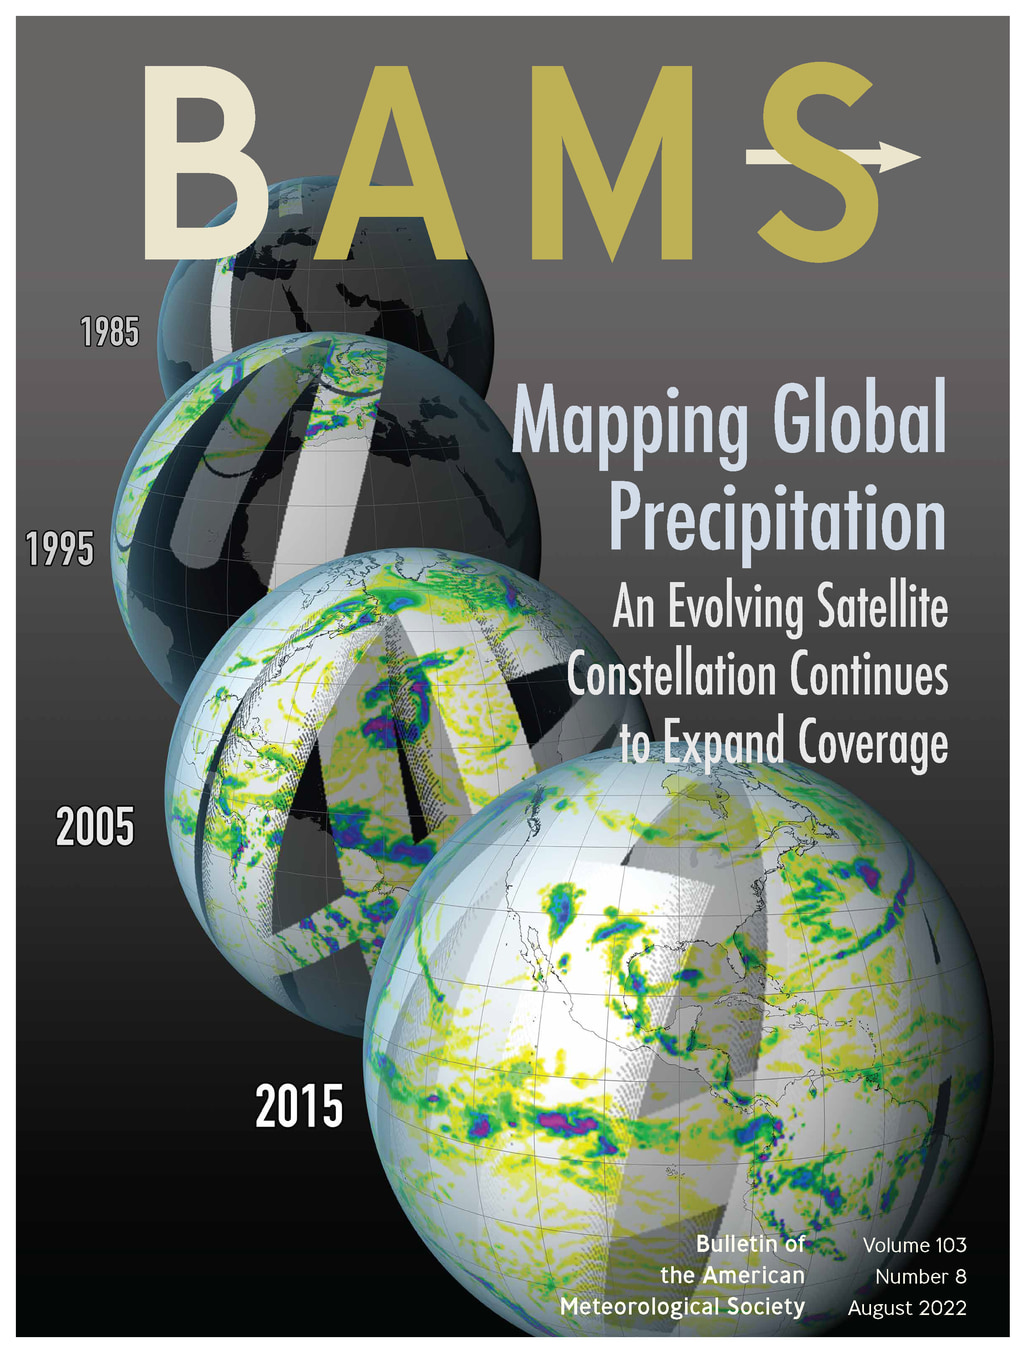 BAMS cover as published, showing the evolution of the coverage of precipitation observations provided by passive microwave satellite sensors from 1985-2015.